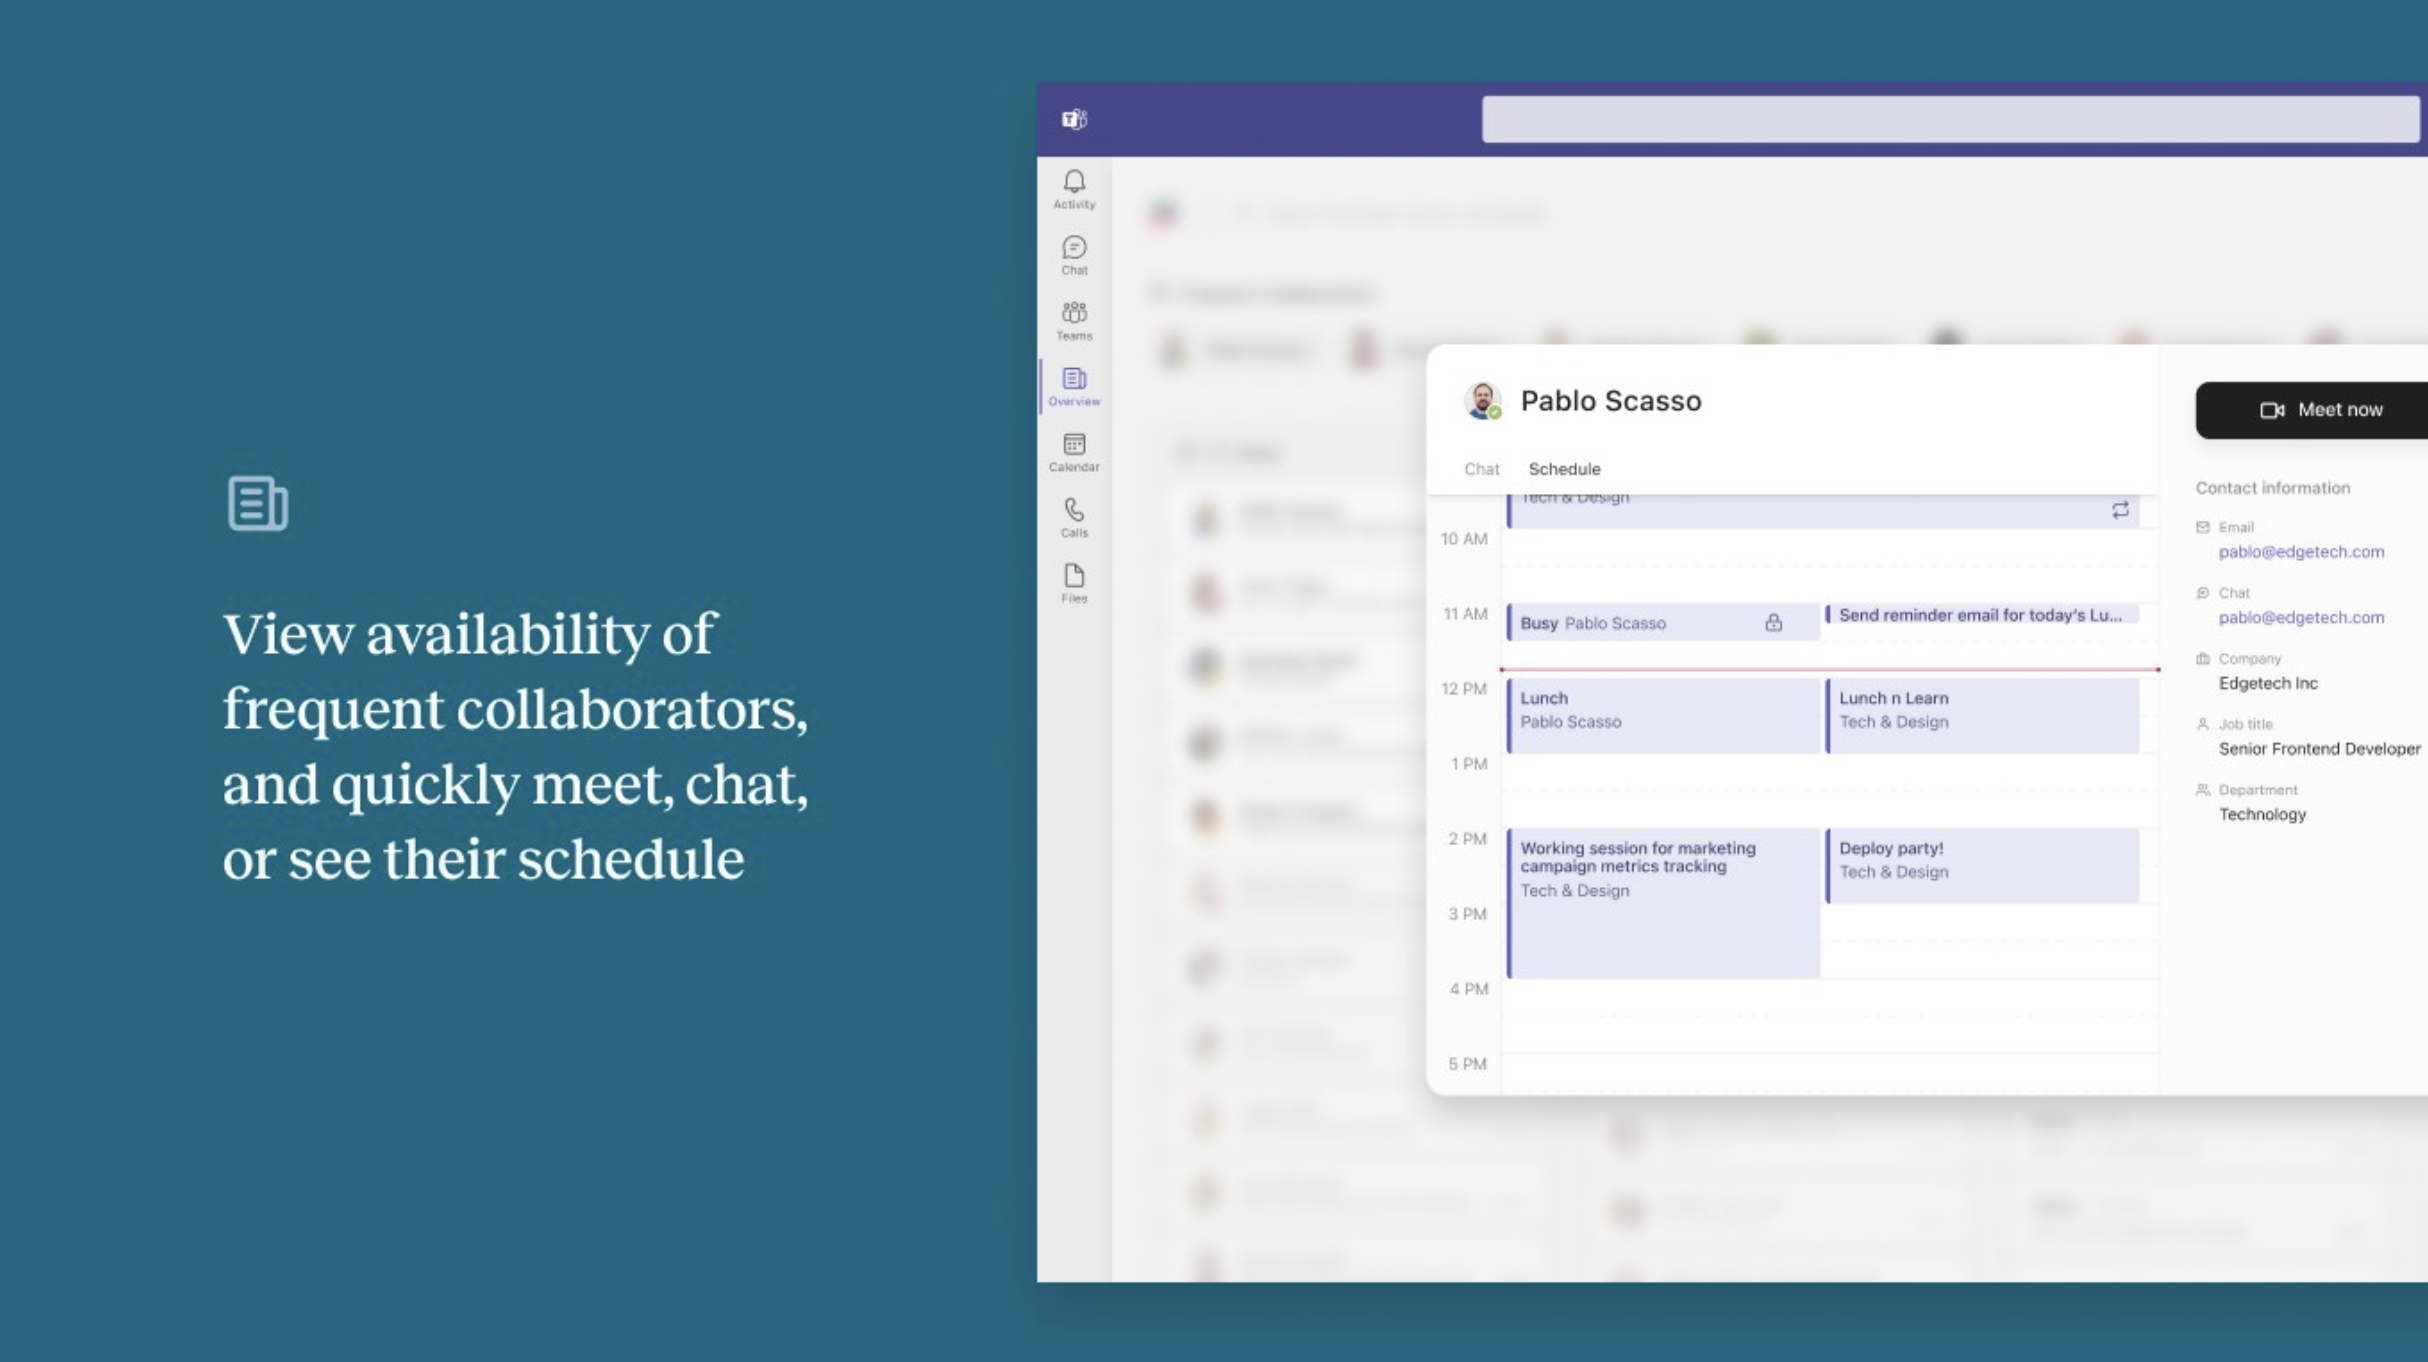 View availability of frequent collaborators to quickly meet, chat, and set meetings